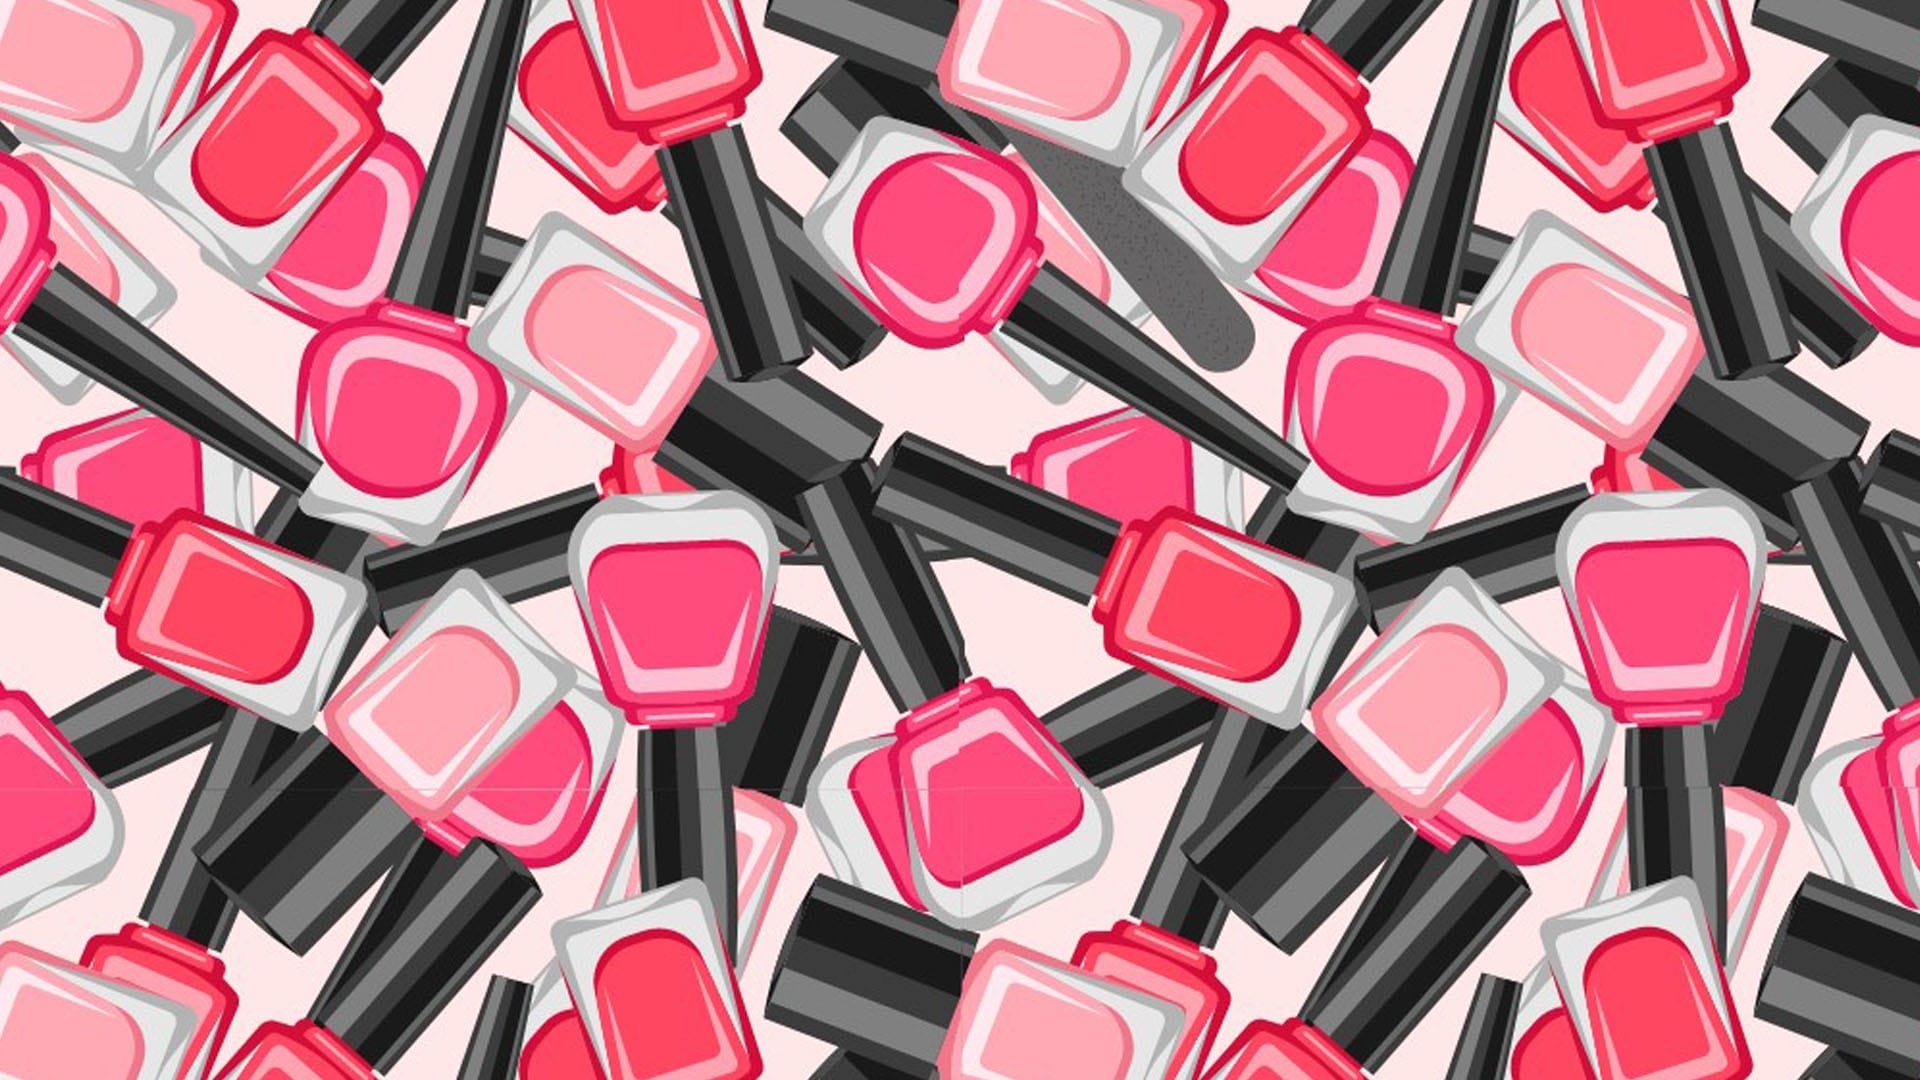 You have 20/20 vision if you spot the hidden nail file among the sea of pink nail polishes in under 10 seconds